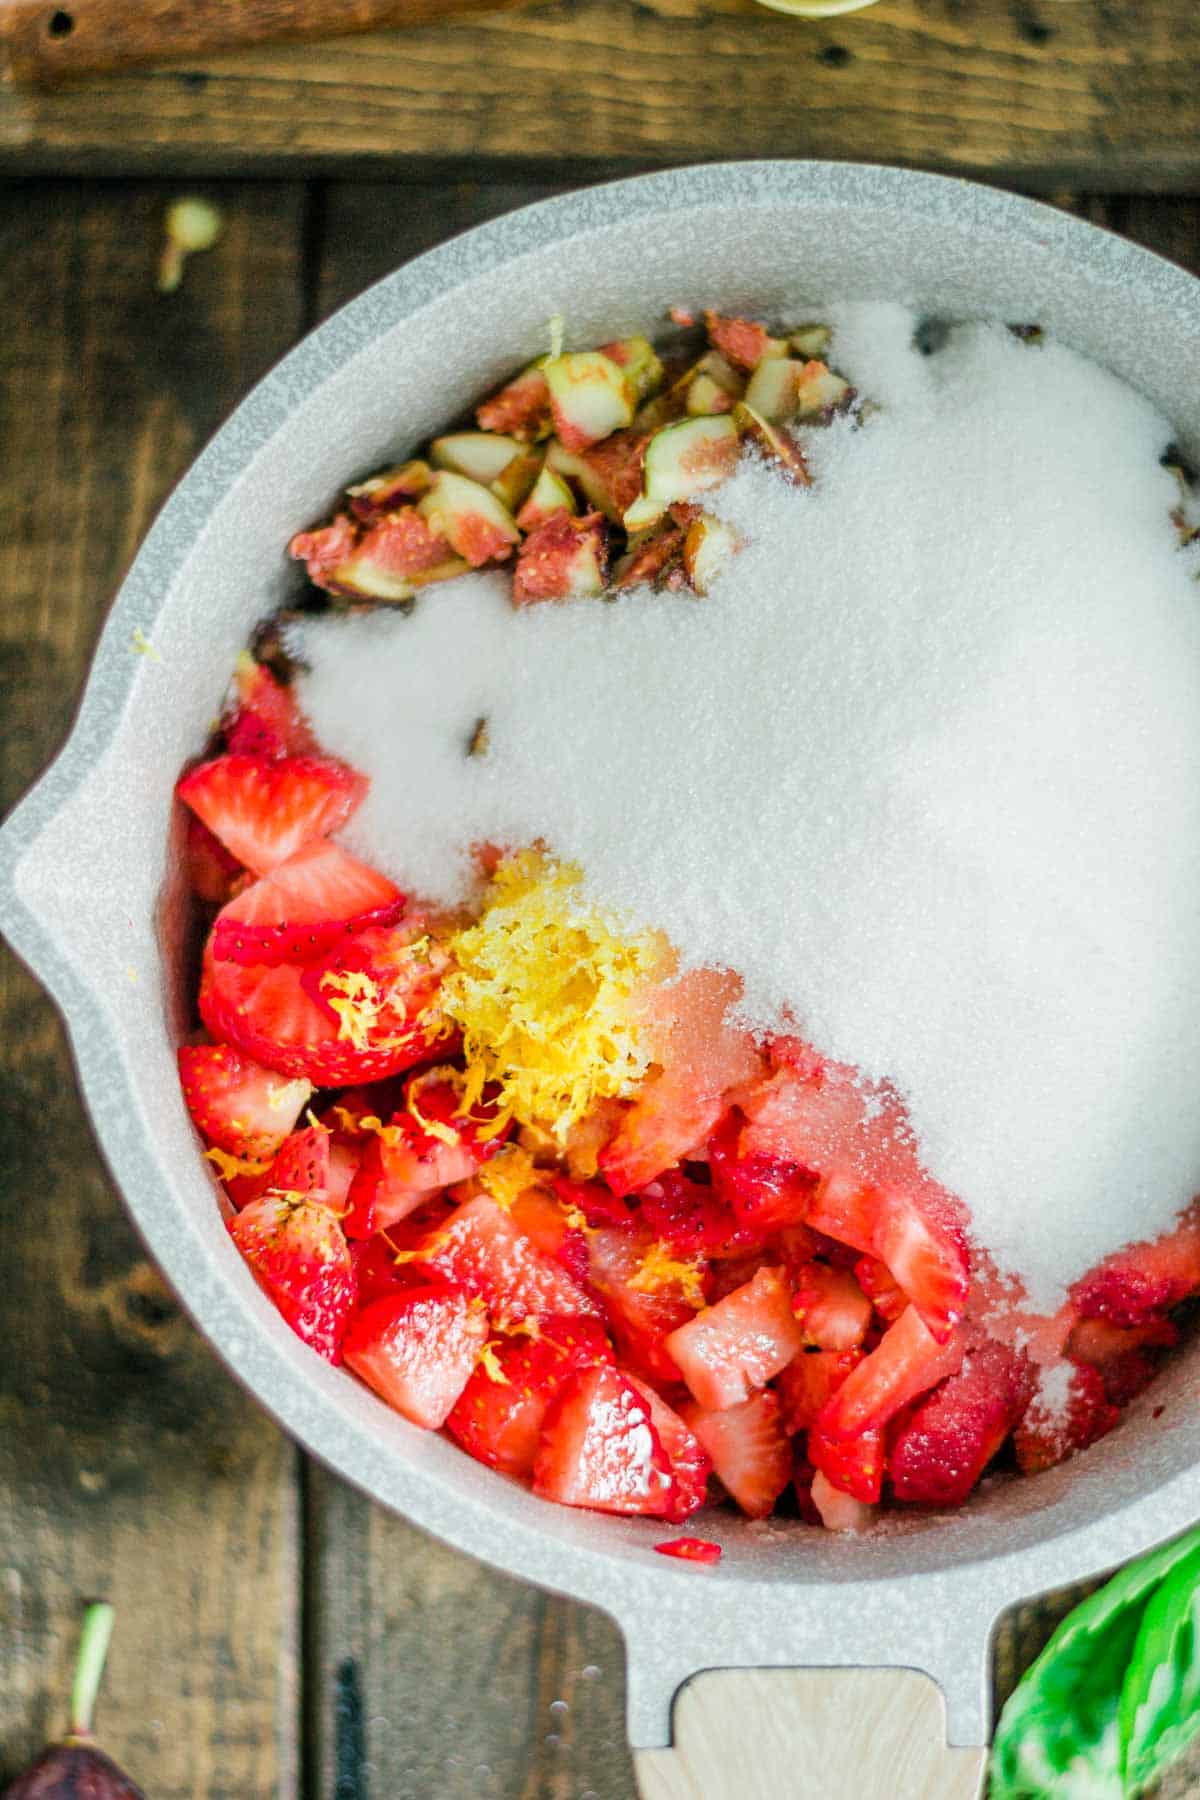 sugar-and-chopped-Strawberries-and-figs-in-saucepan-for-Strawberries-figs-preserves-recipe